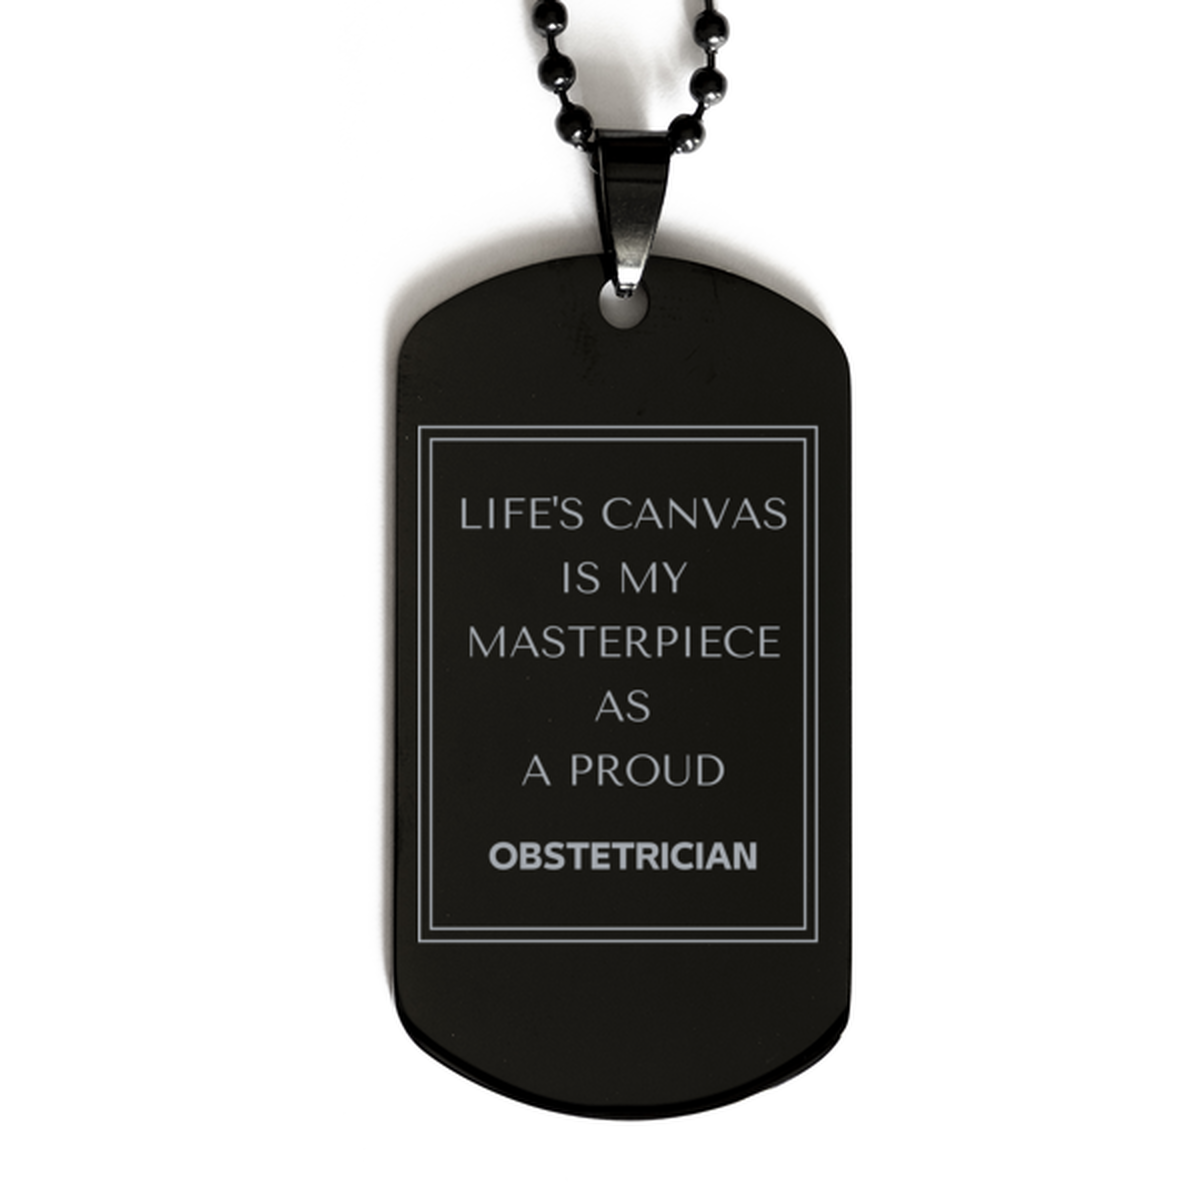 Proud Obstetrician Gifts, Life's canvas is my masterpiece, Epic Birthday Christmas Unique Black Dog Tag For Obstetrician, Coworkers, Men, Women, Friends